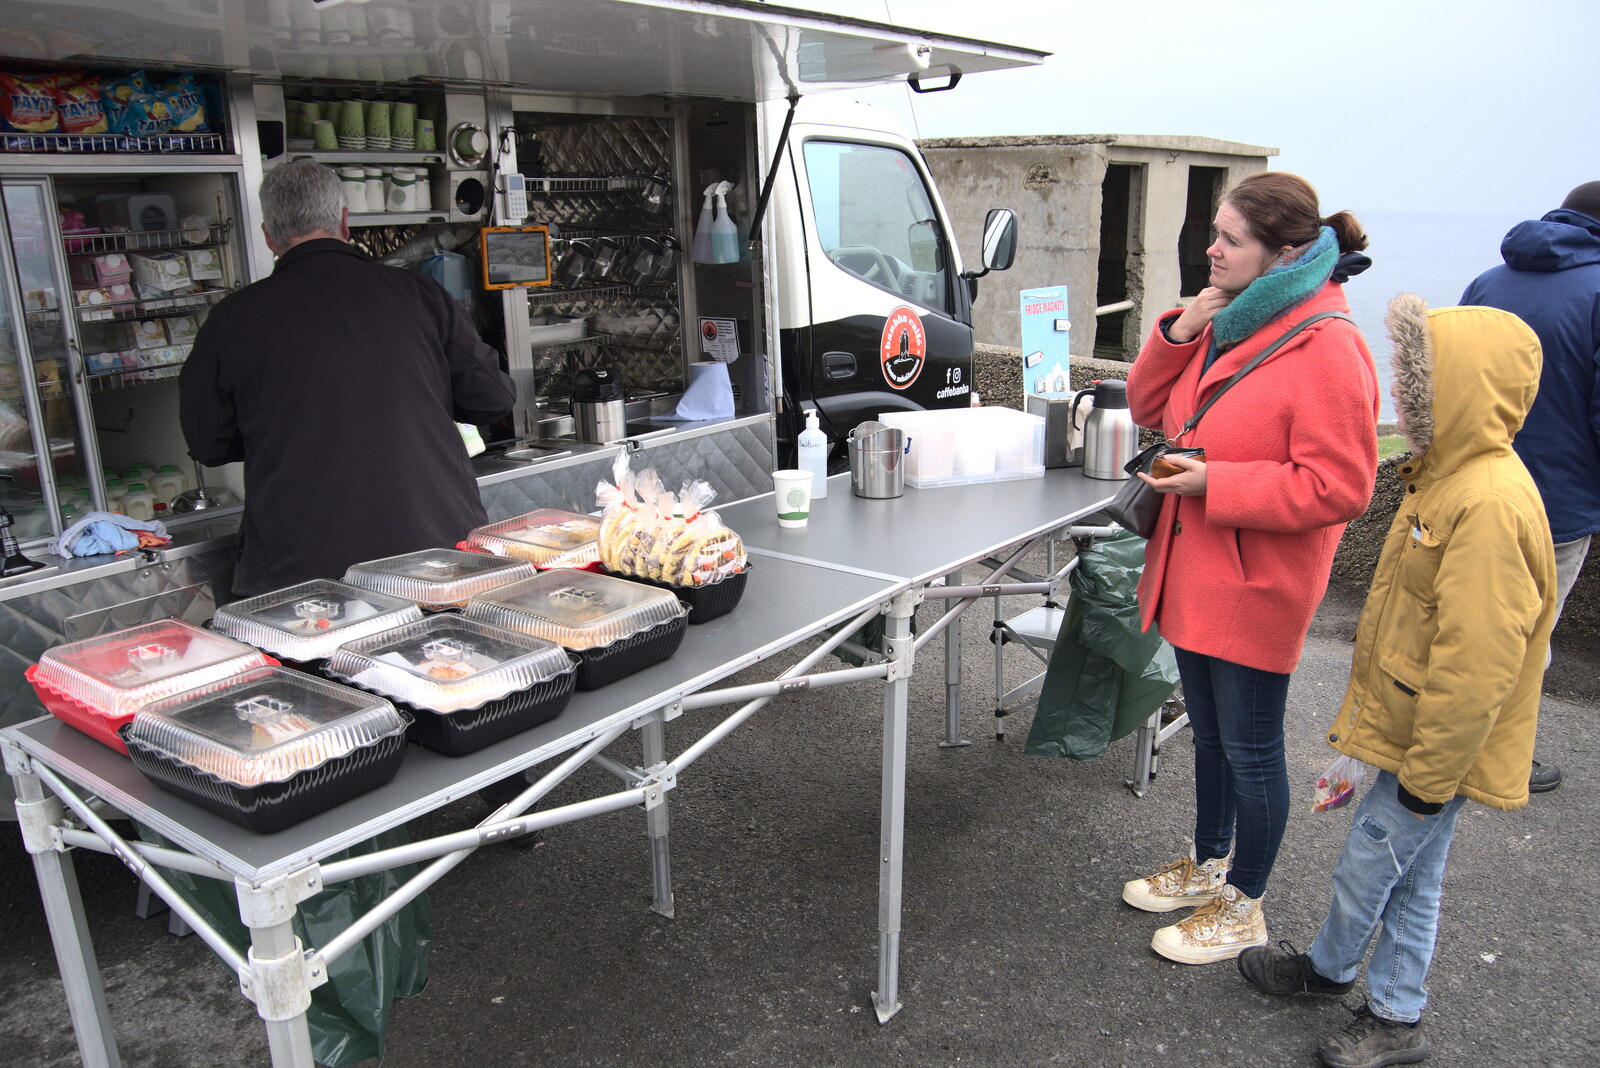 Greencastle, Doagh and Malin Head, County Donegal, Ireland - 19th April 2022: Isobel gets a coffee from the van